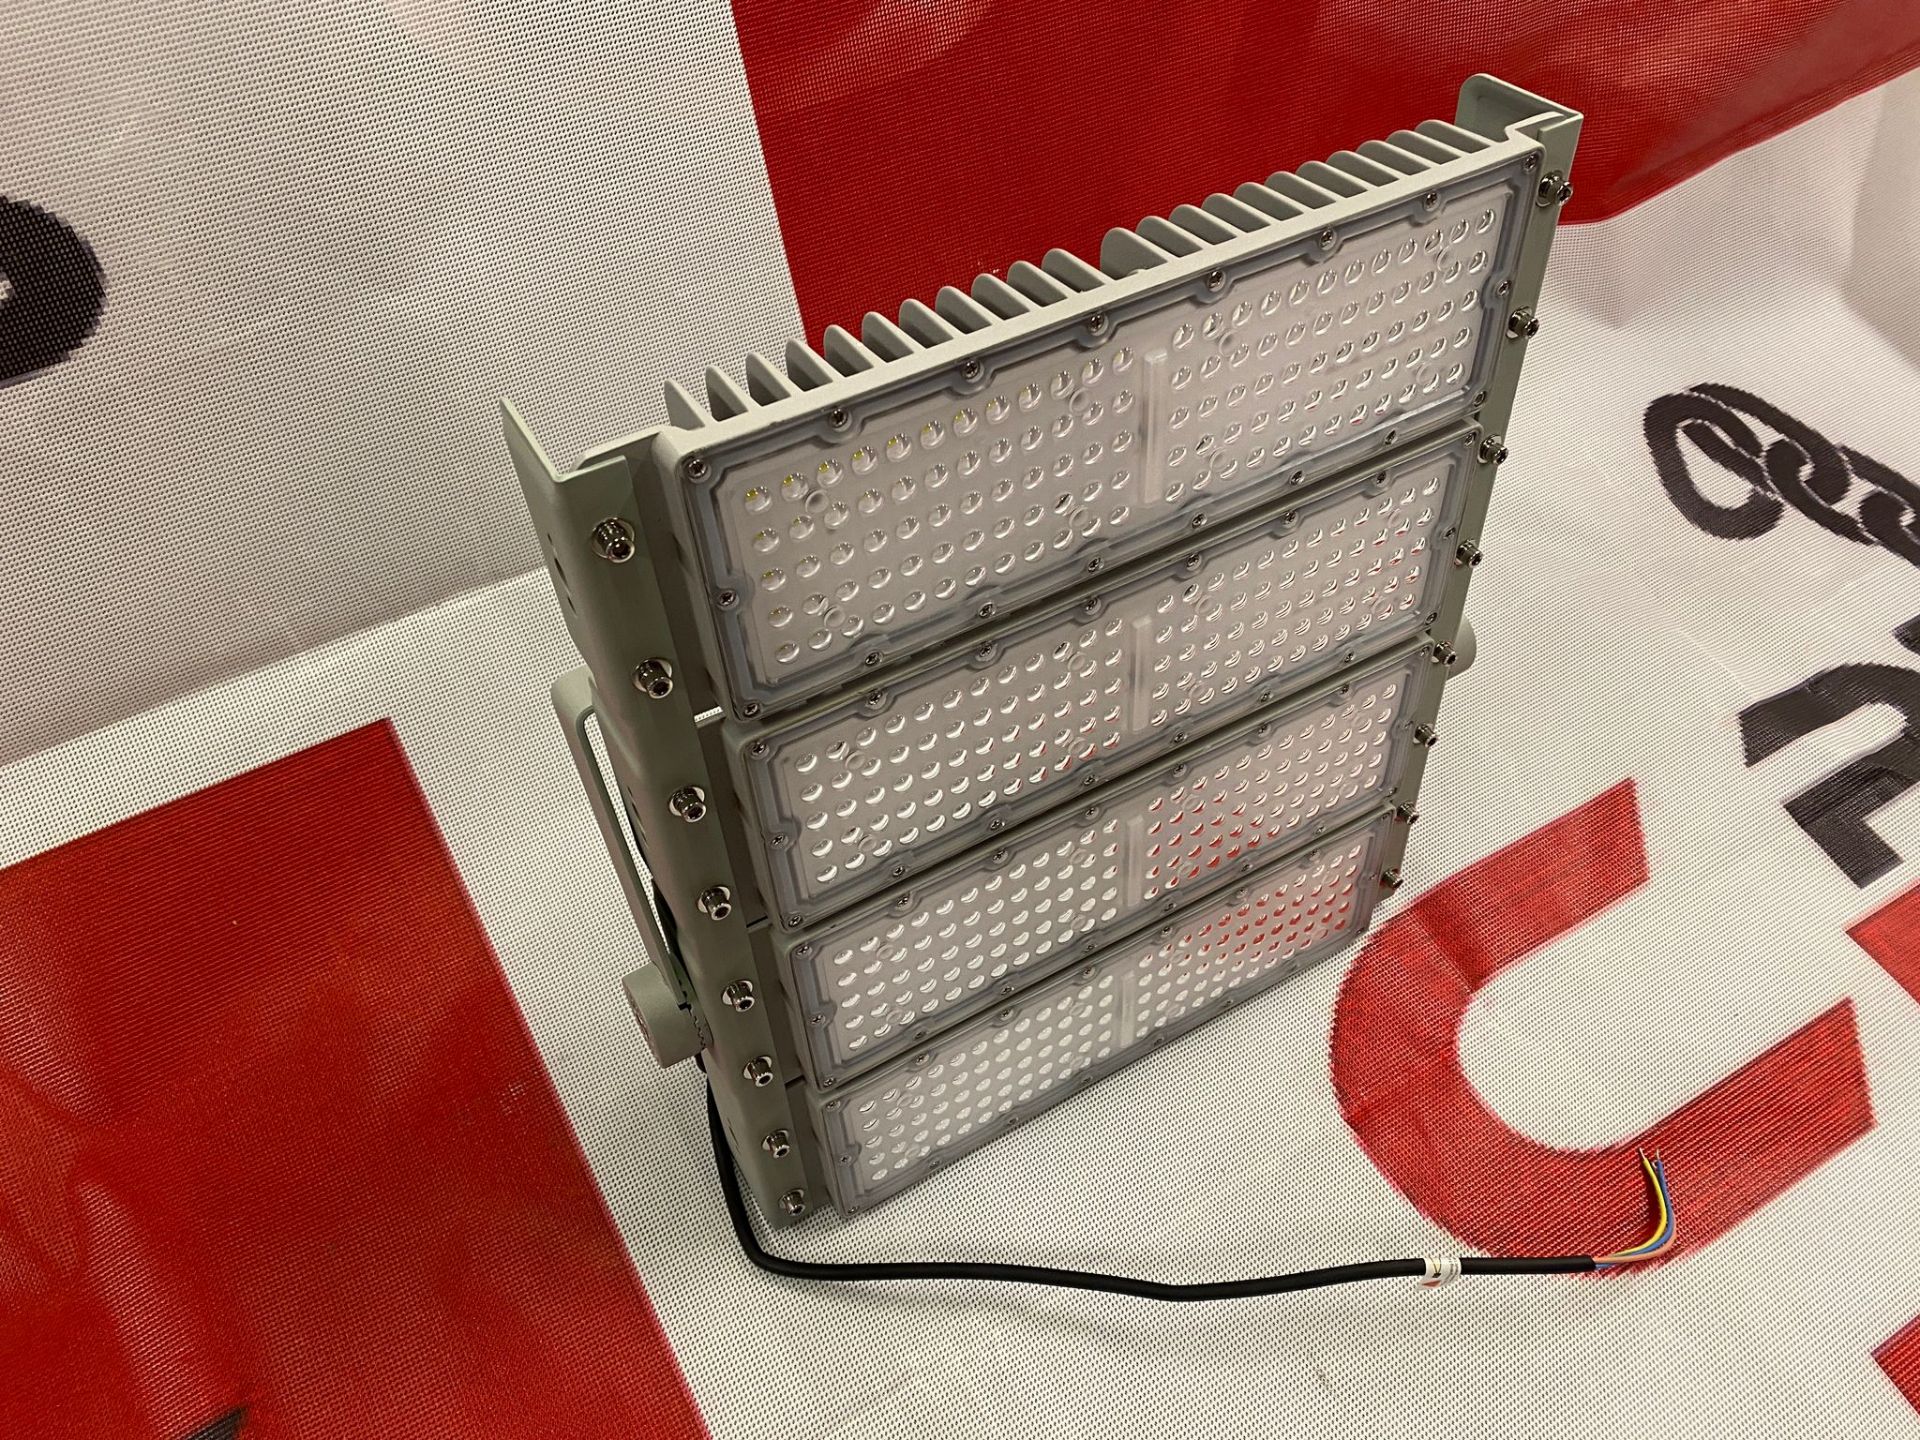 1 x LED400 Watt Flood Light Panel - For Car Parks, Security, Playing fields, Football pitches etc - Image 8 of 8